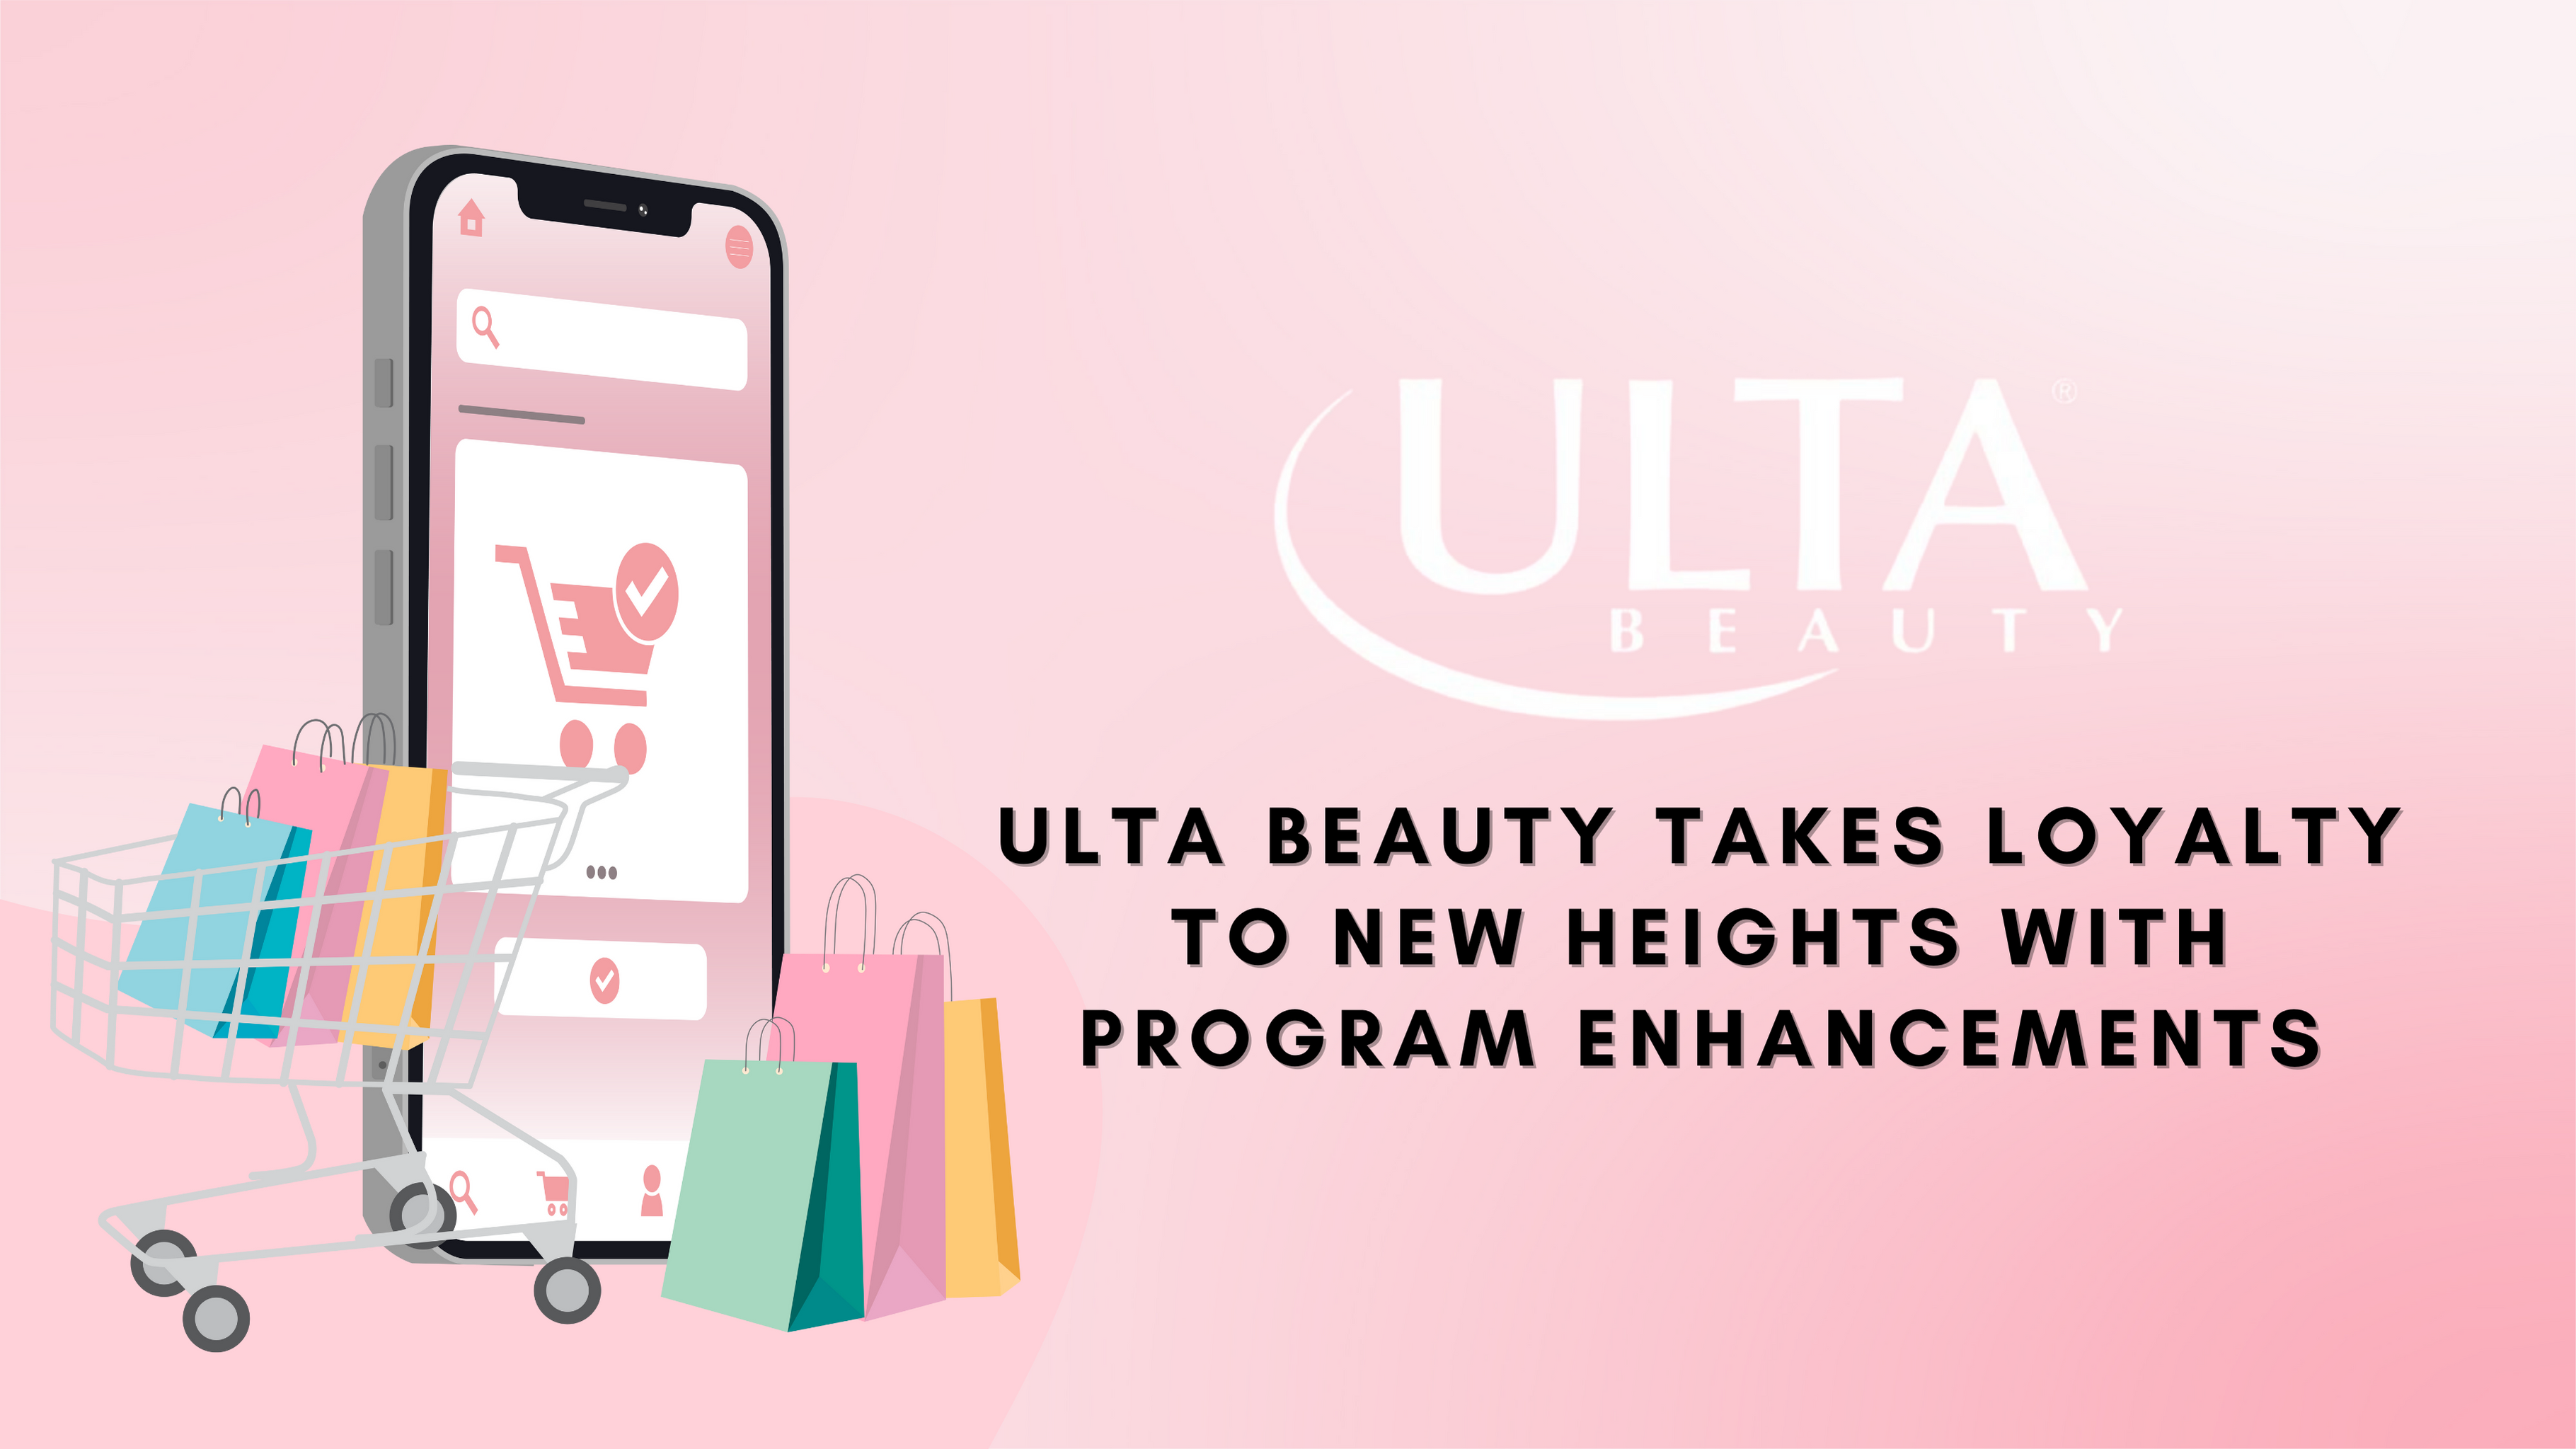 Ulta Beauty Takes Loyalty to New Heights with Program Enhancements